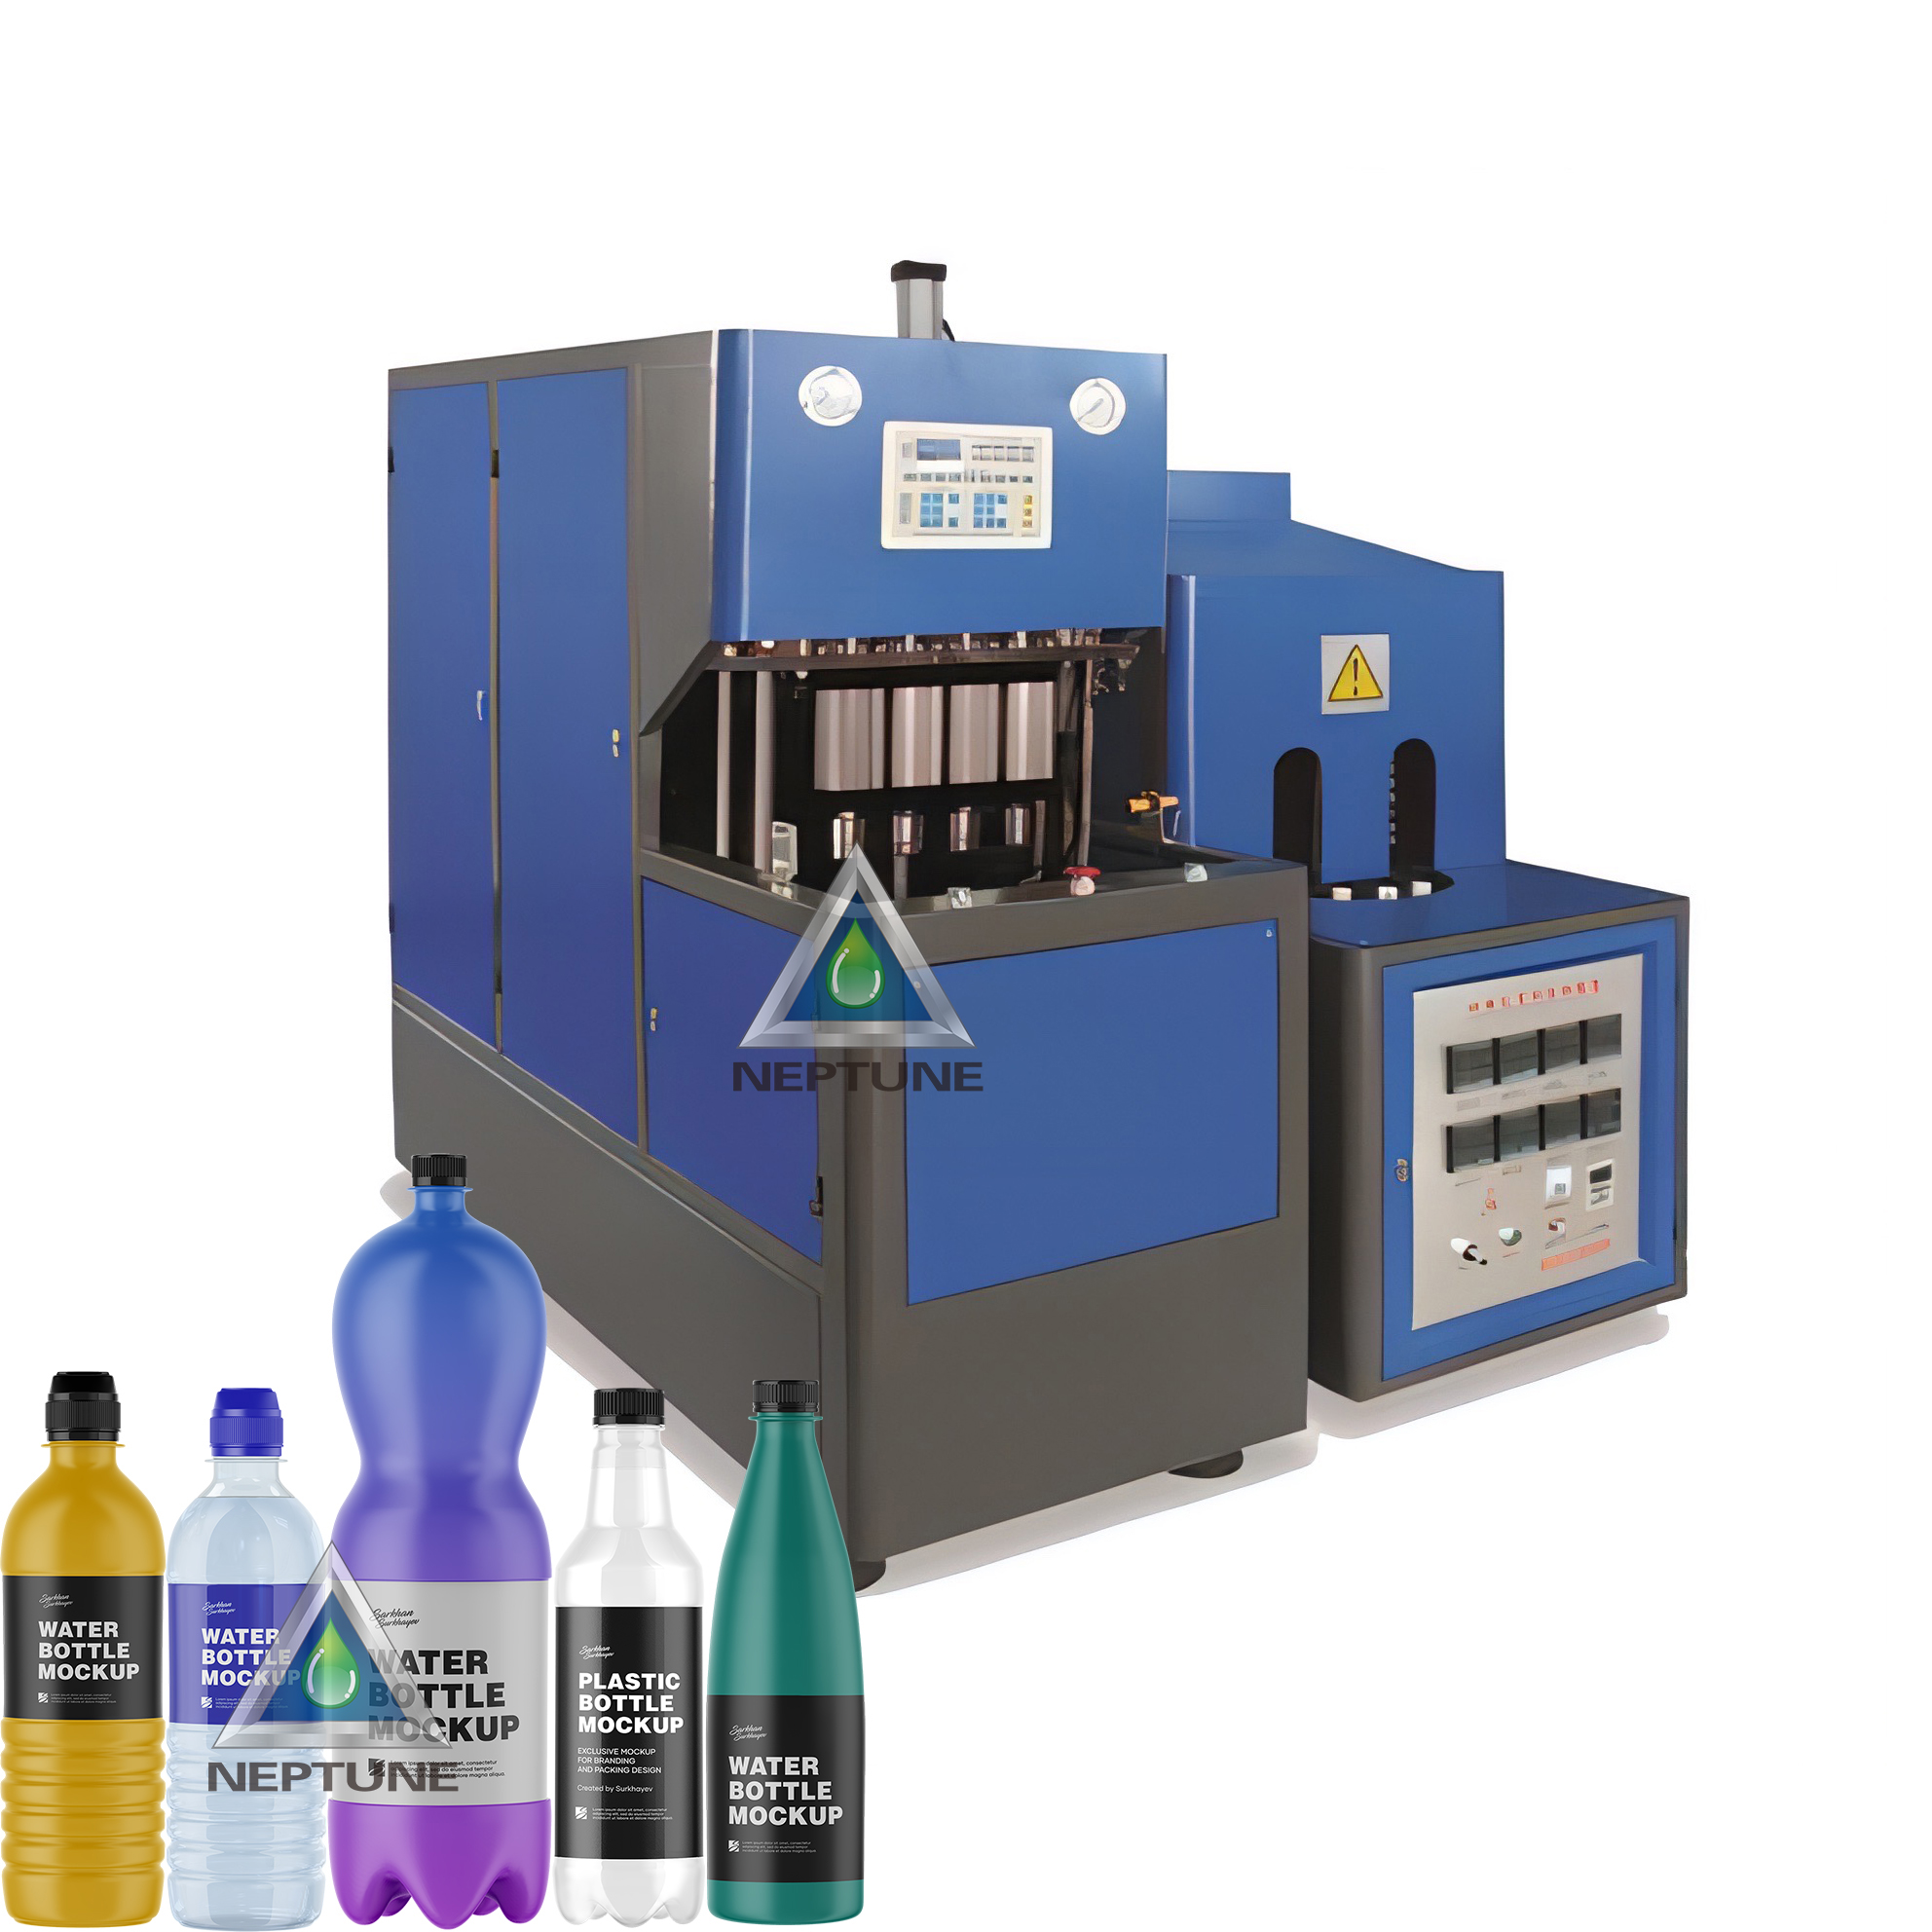 2000 bottles per hour capacity water bottle manufacturing machine with 4 cavity that once can produce 4 psc water bottle